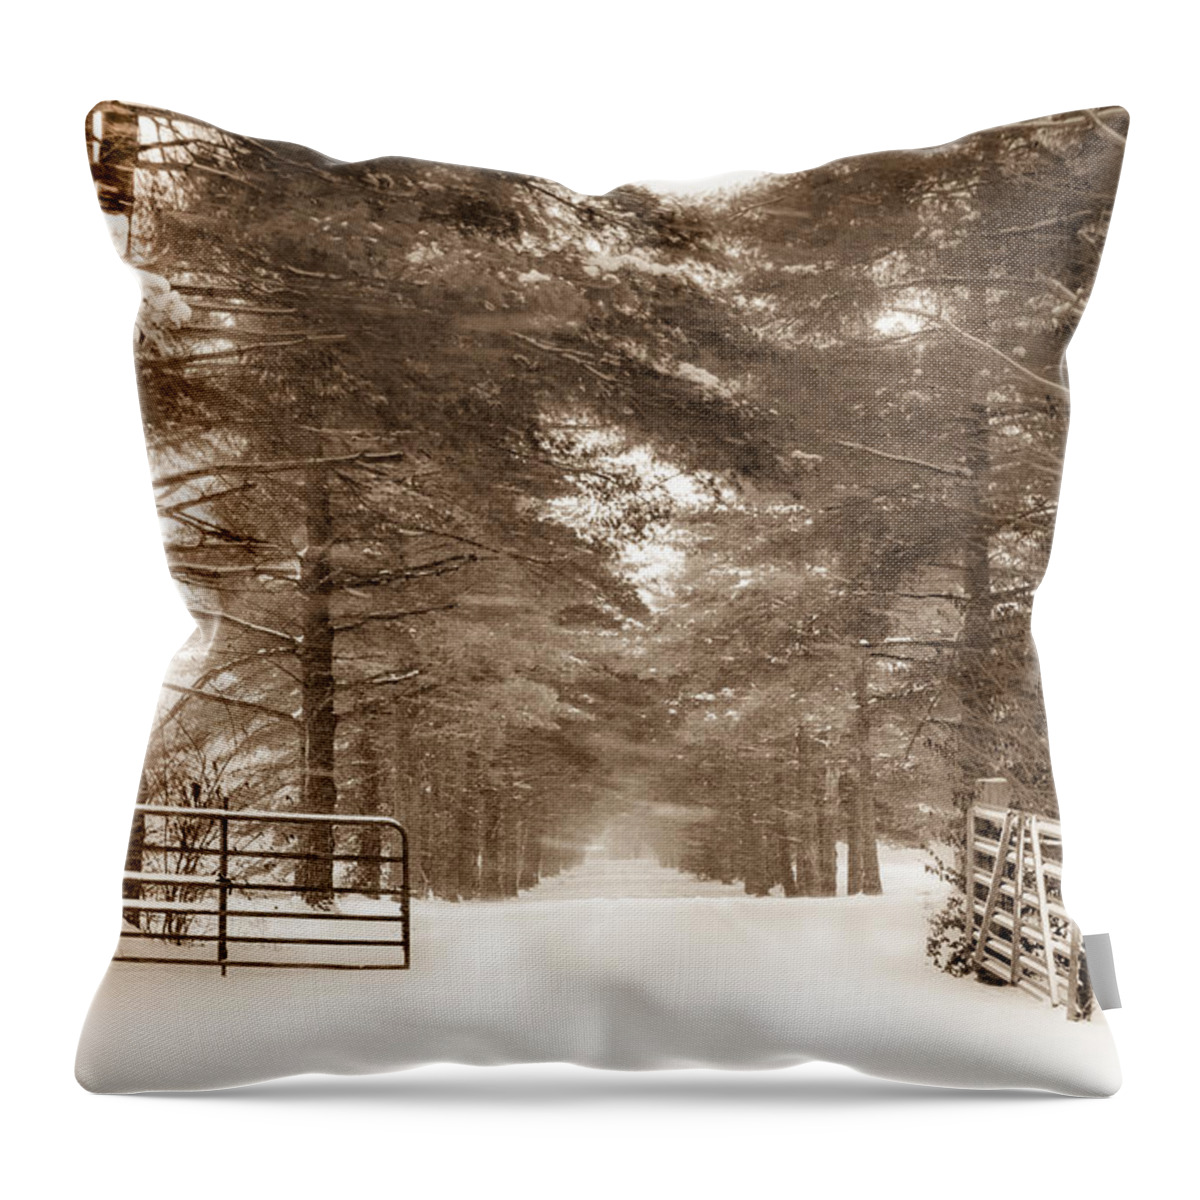 No Trespassing Throw Pillow featuring the photograph No Trespassing - Sepia by Ron Pate